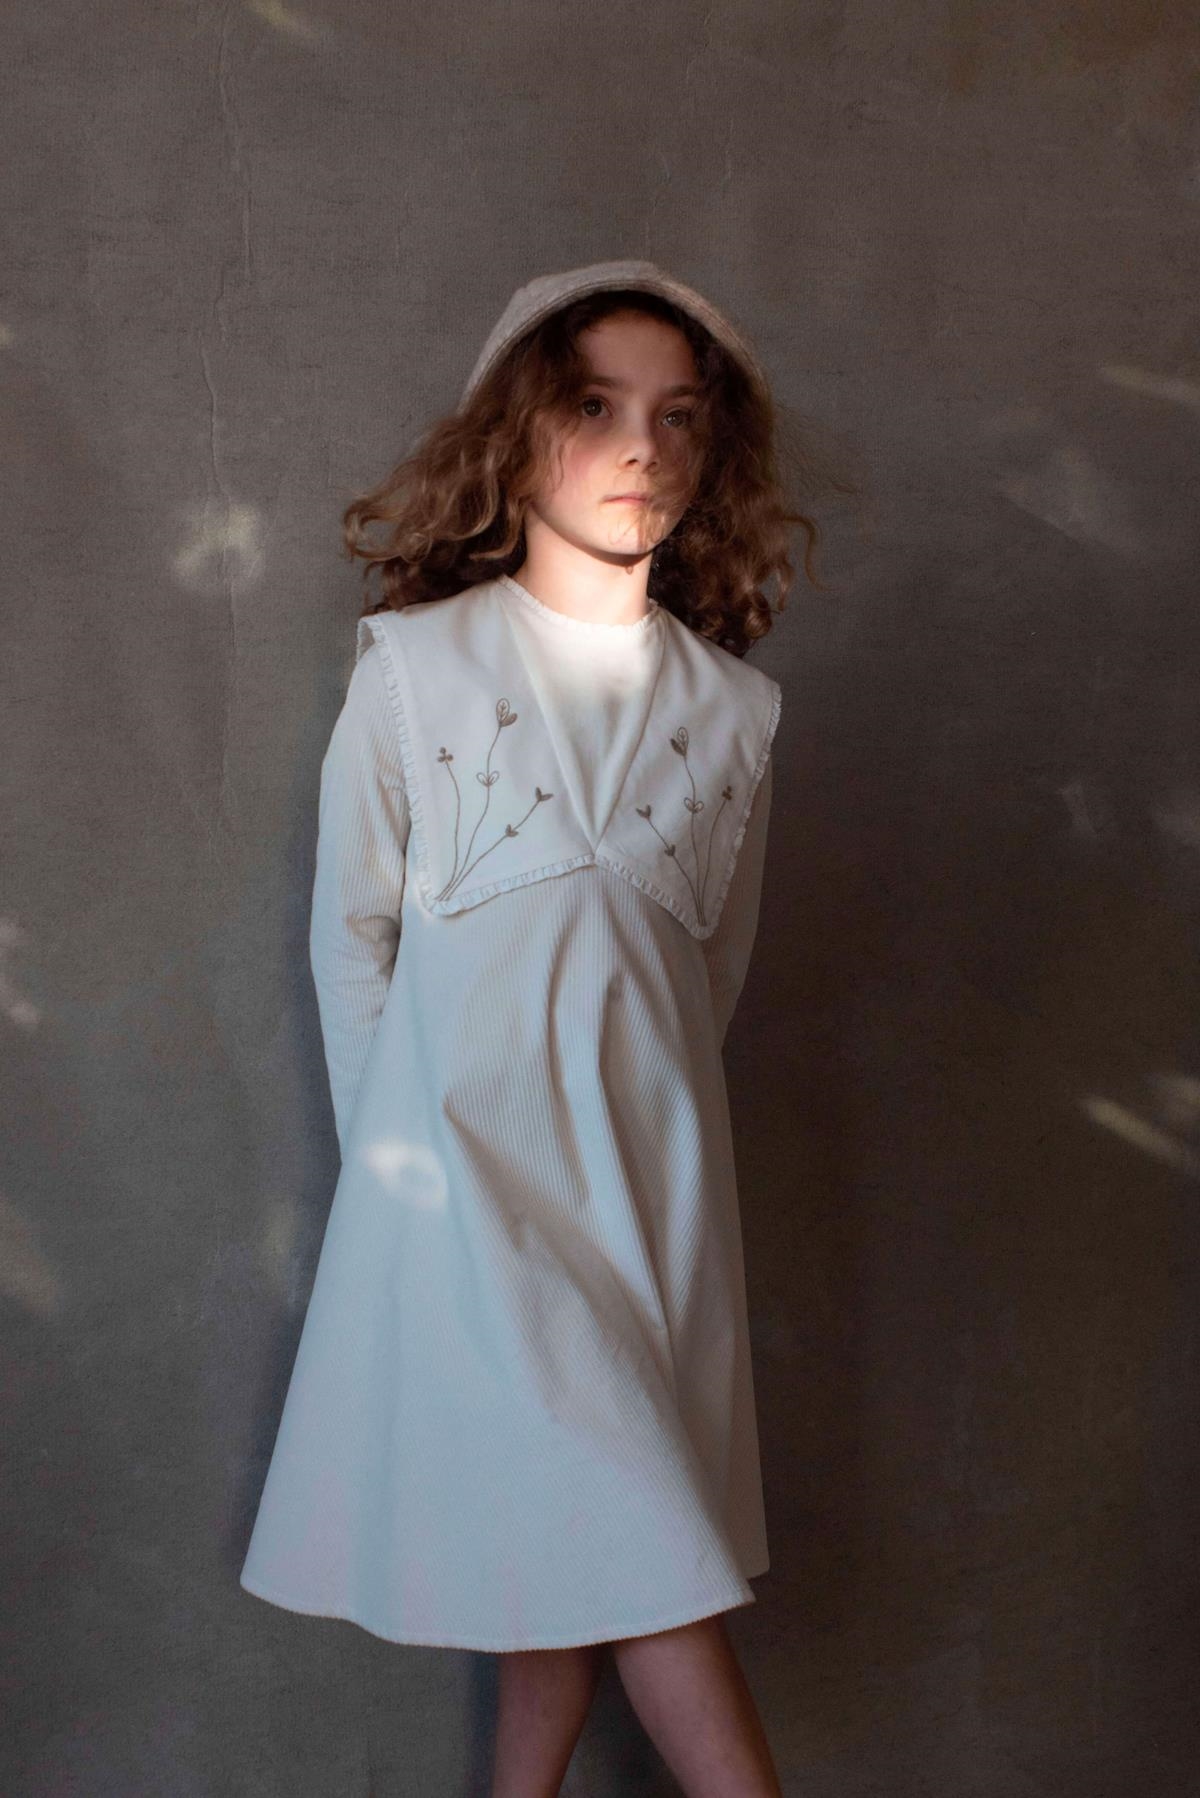 Mod.32.1 Off-white cape-style dress with artisan embroidered collar | AW23.24 Mod.32.1 Off-white cape-style dress with artisan embroidered collar